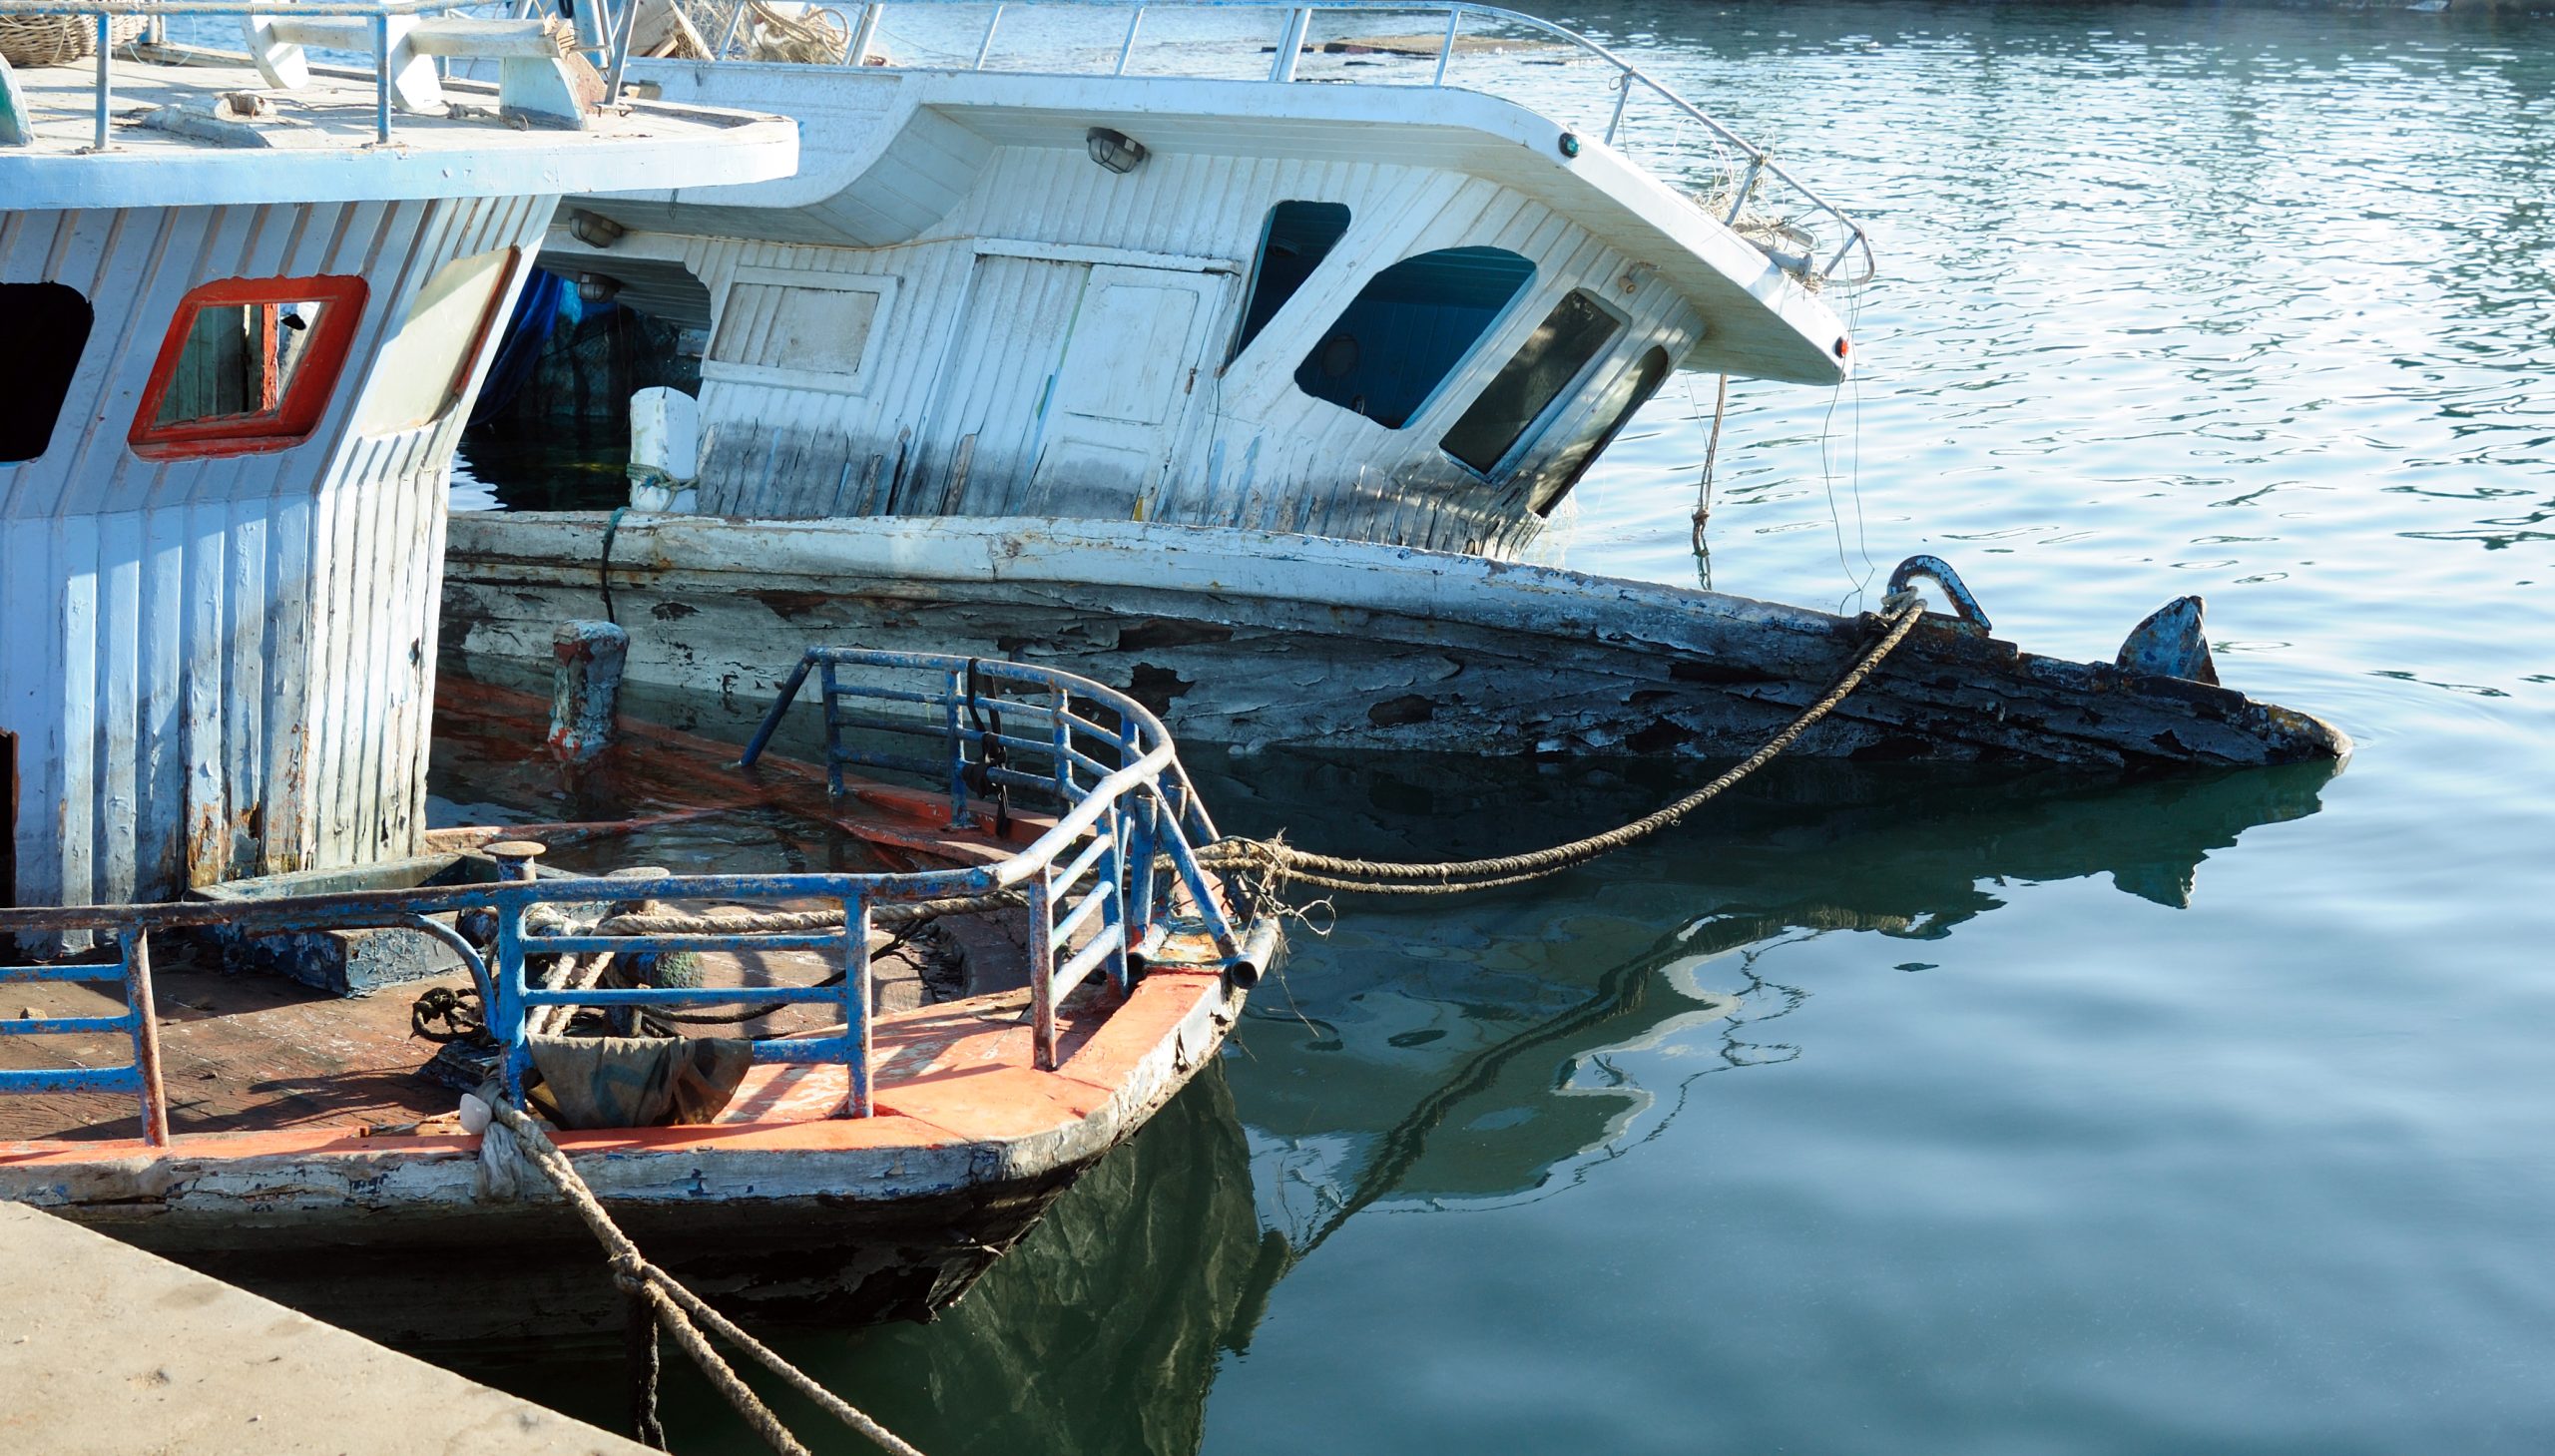 What should I do if I get into a boating accident?